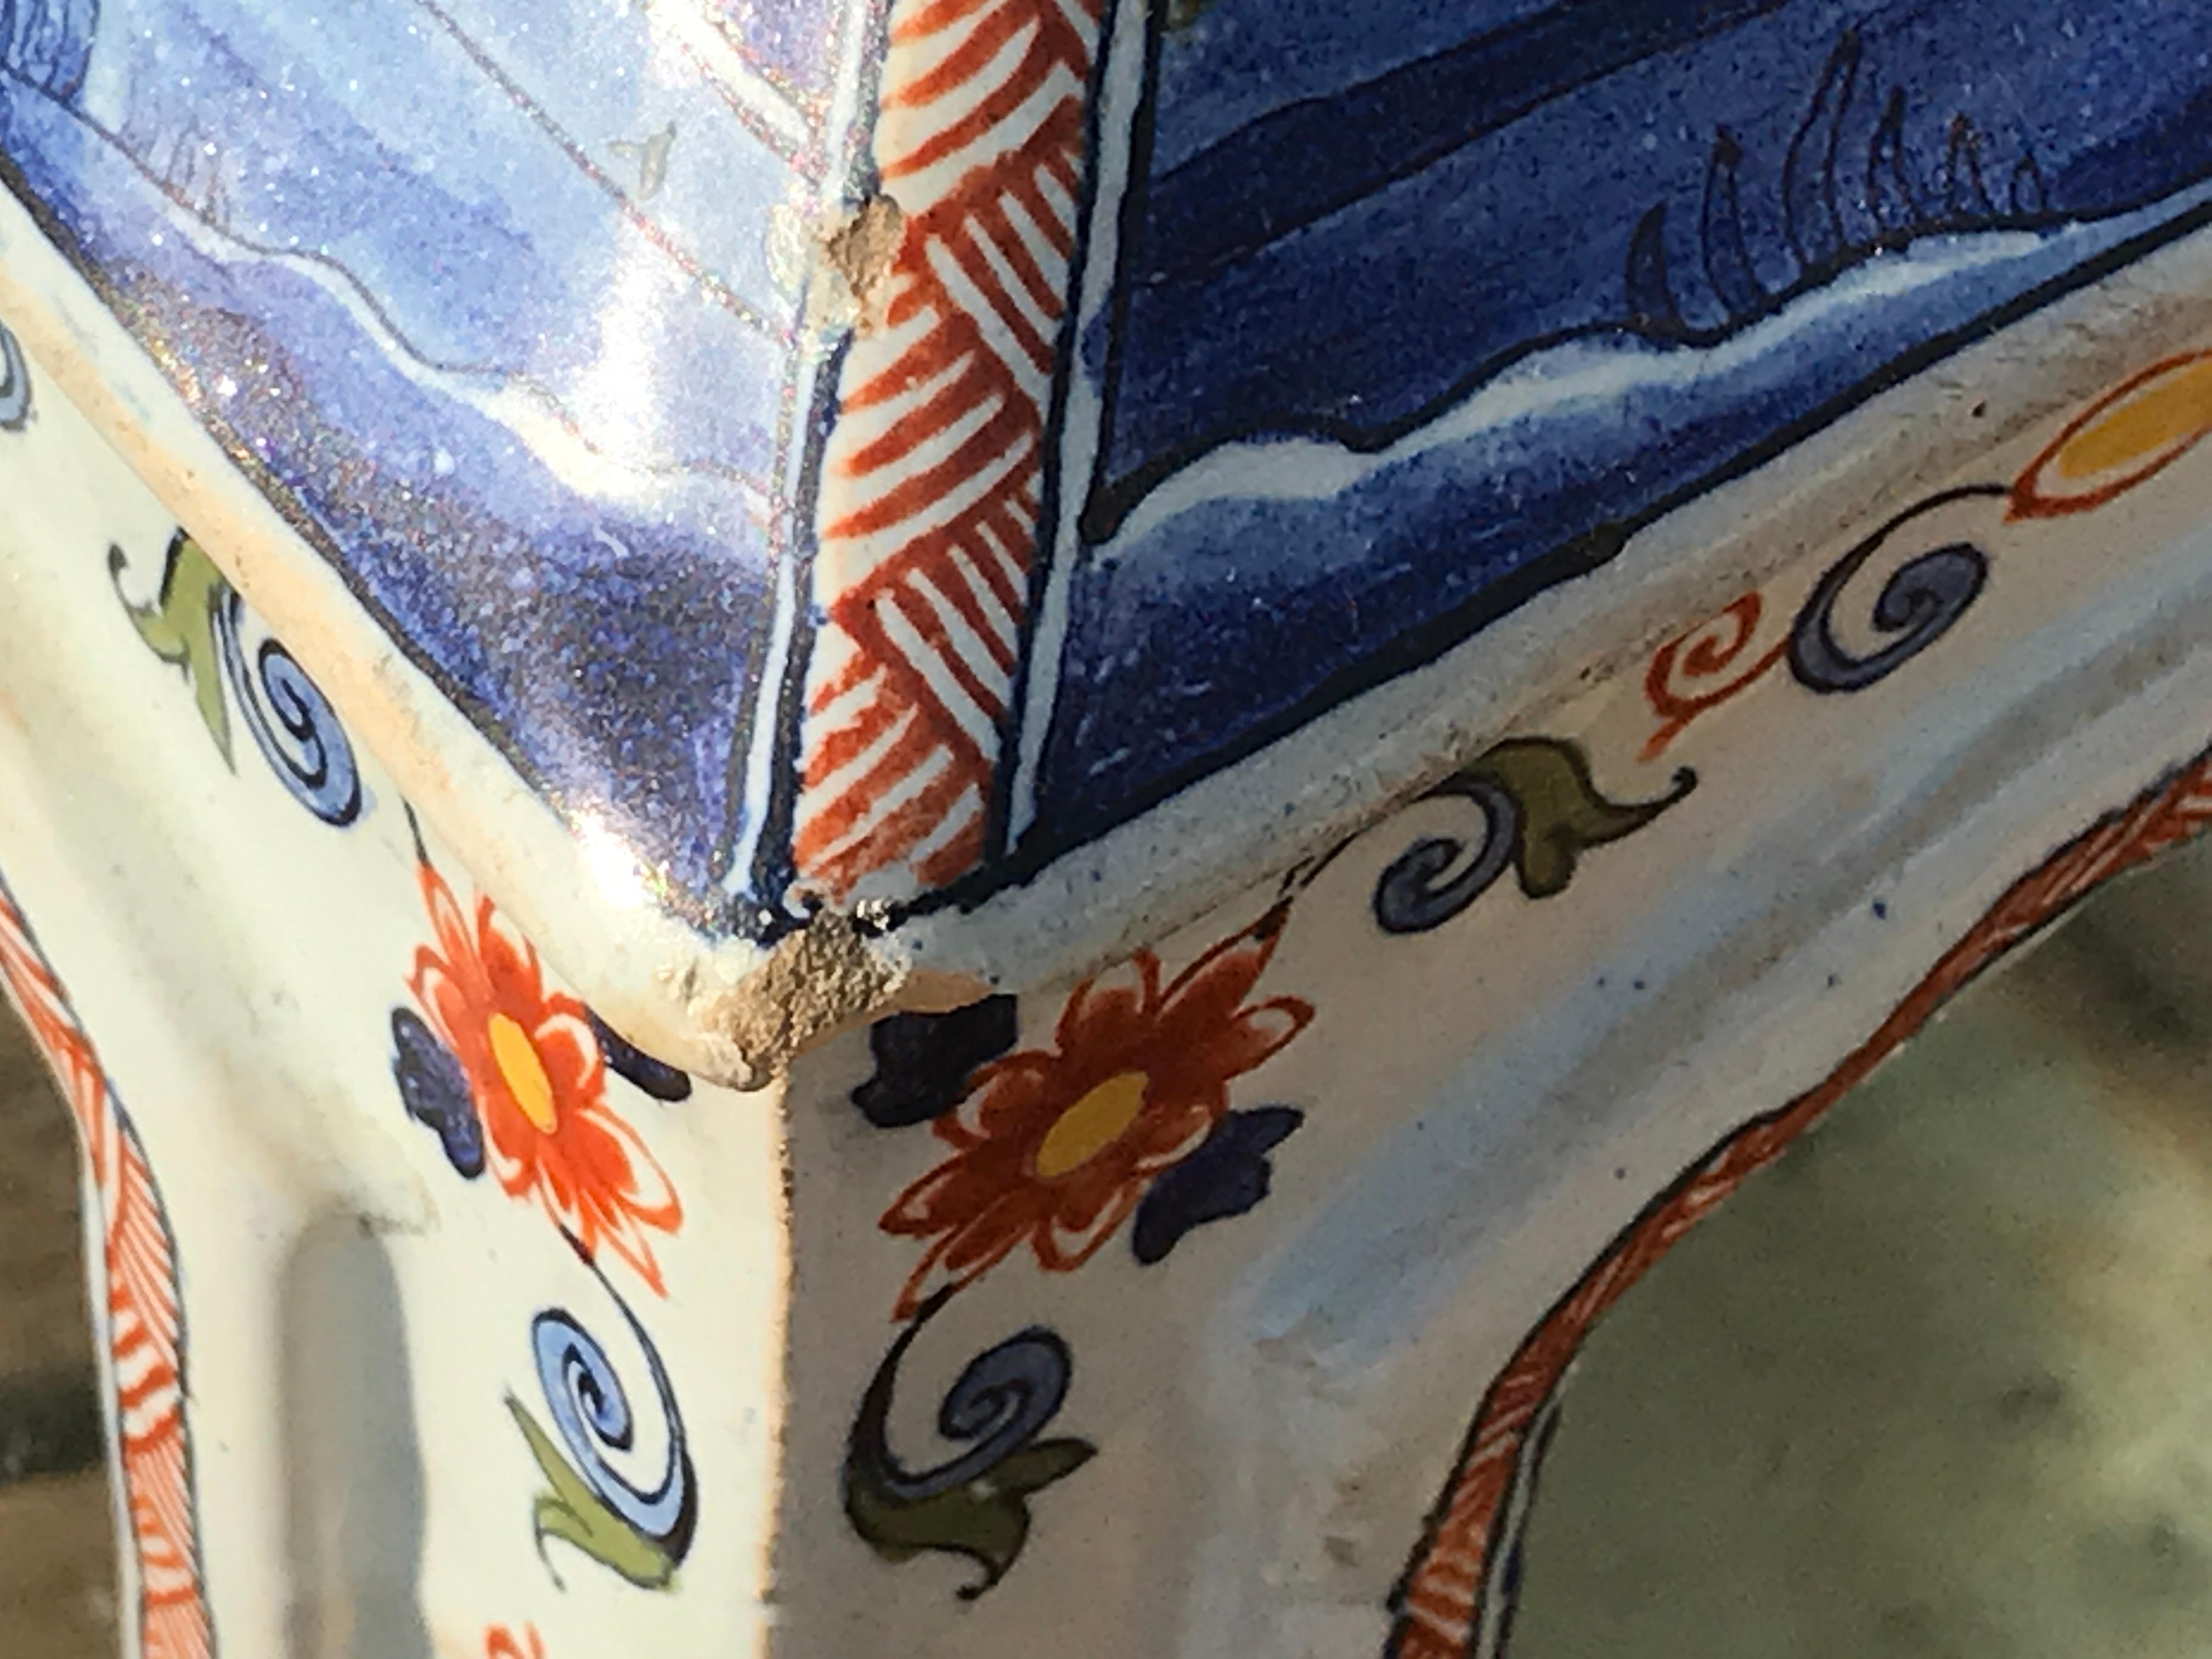 Lantern, Delftware, mid-18th Century, Dutch, Polychrome, Tryhoorn Collection For Sale 12